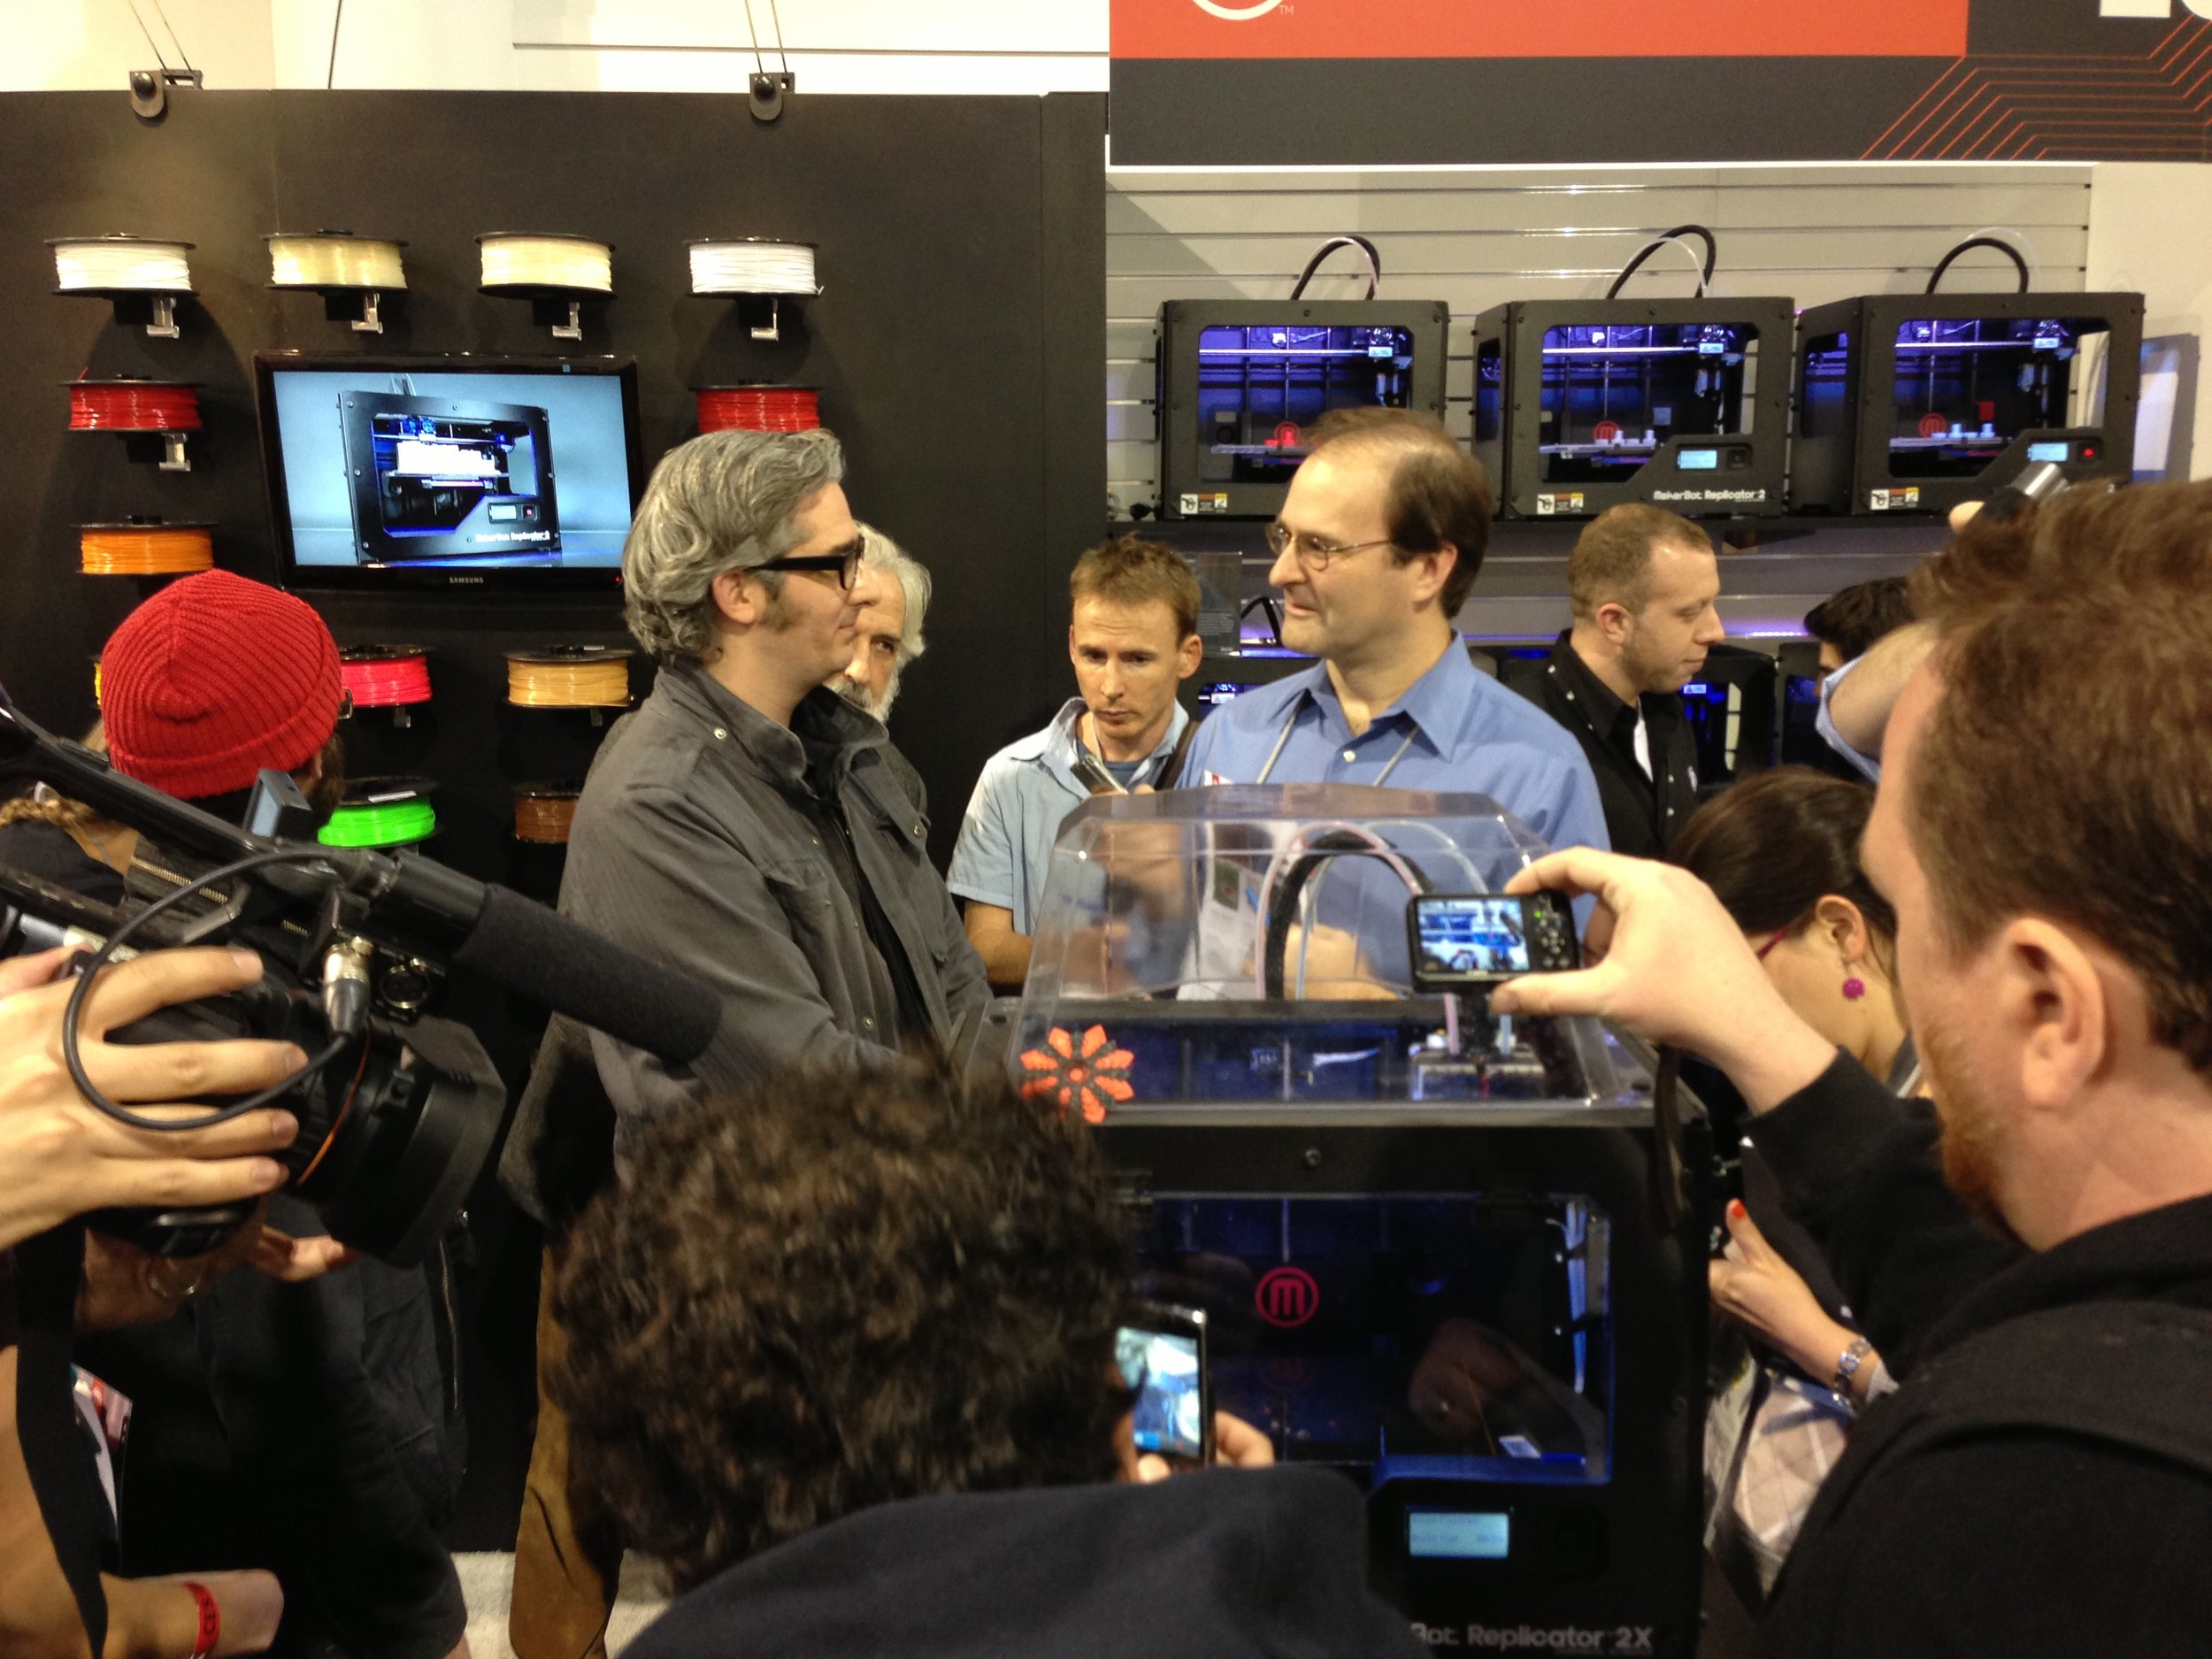  Former MakerBot CEO Bre Pettis announcing the then new Replicator 2X 